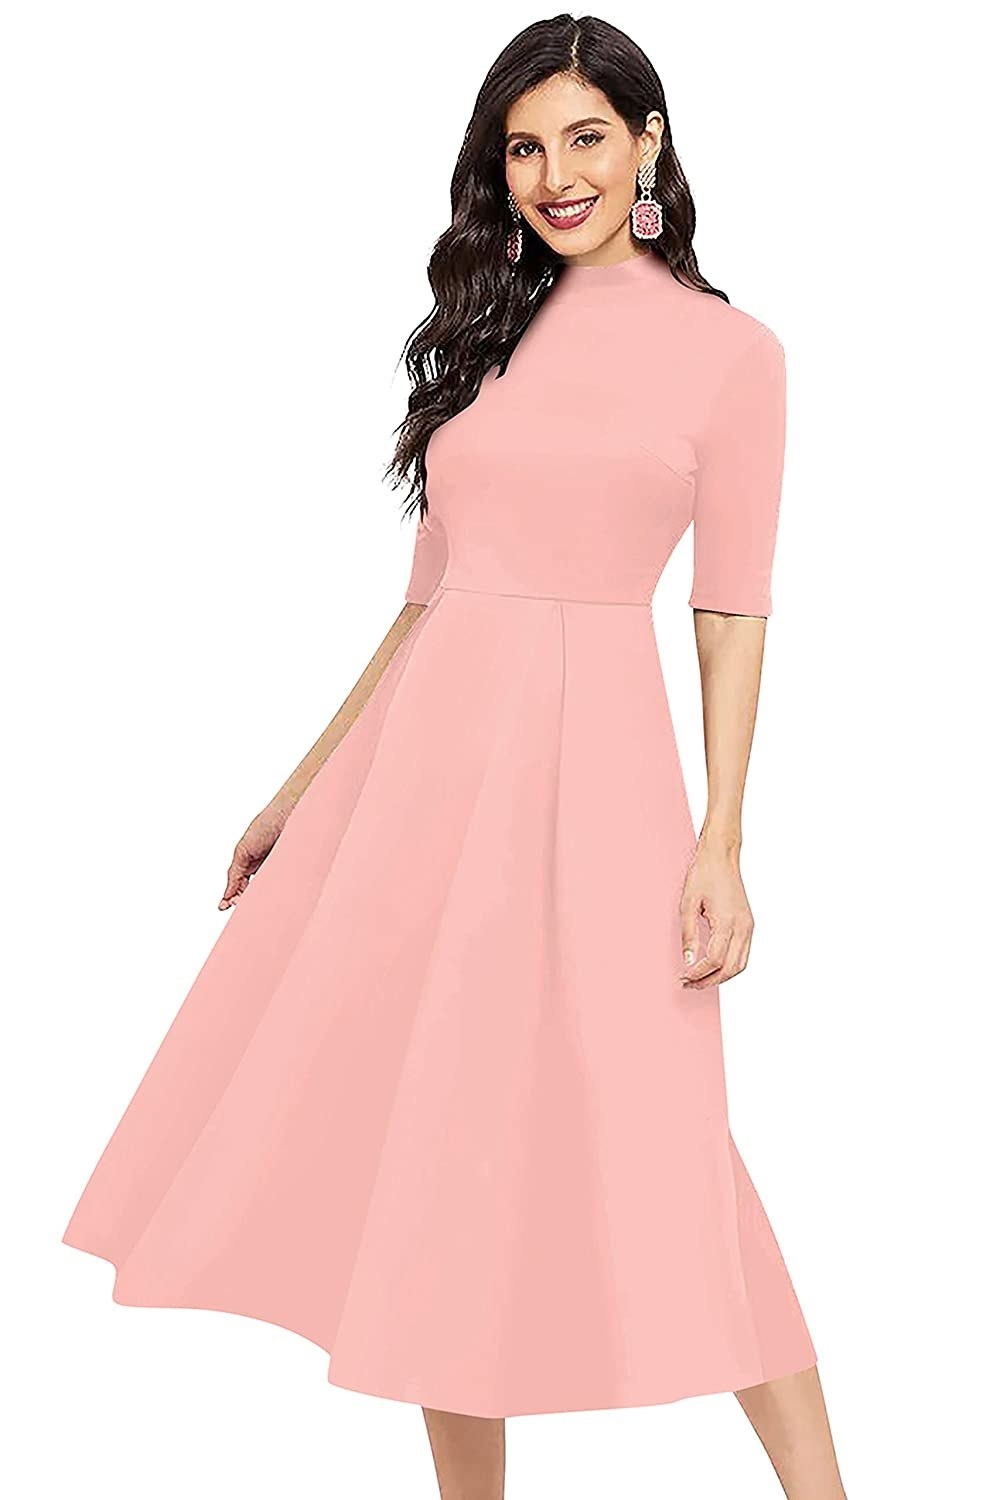 A woman wearing half sleeved high neck midi dress in pastel pink